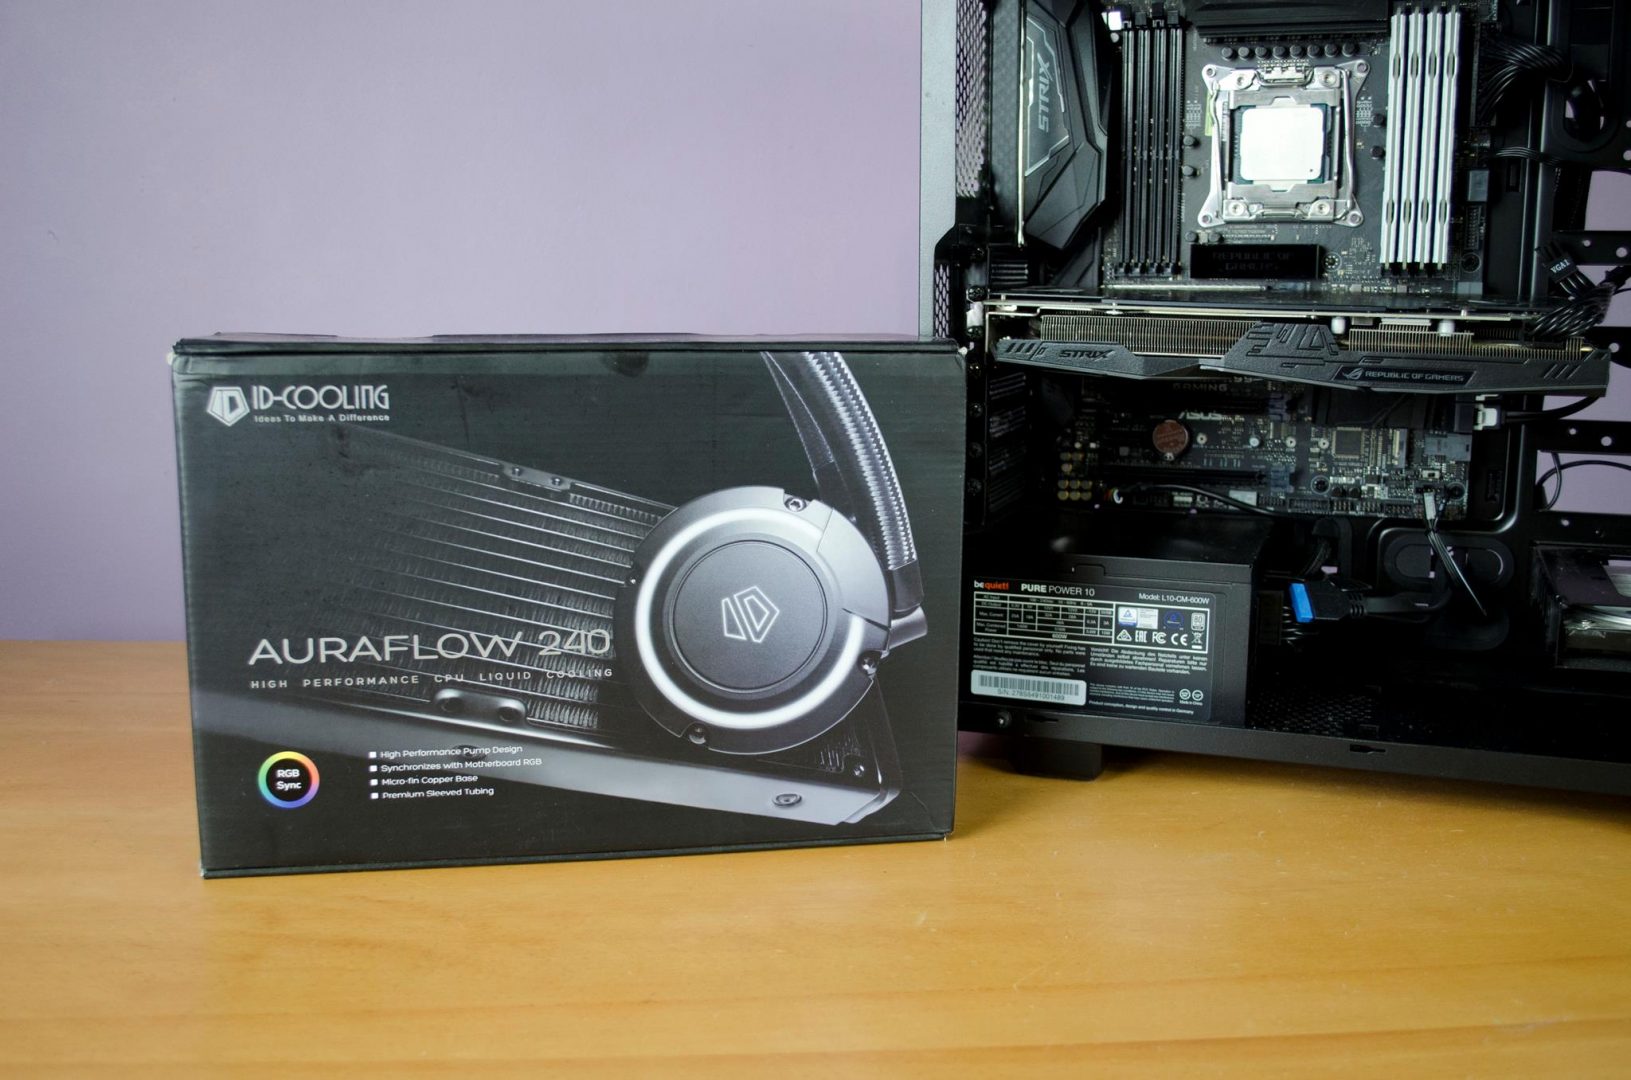 id cooling auraflow 240 aio review